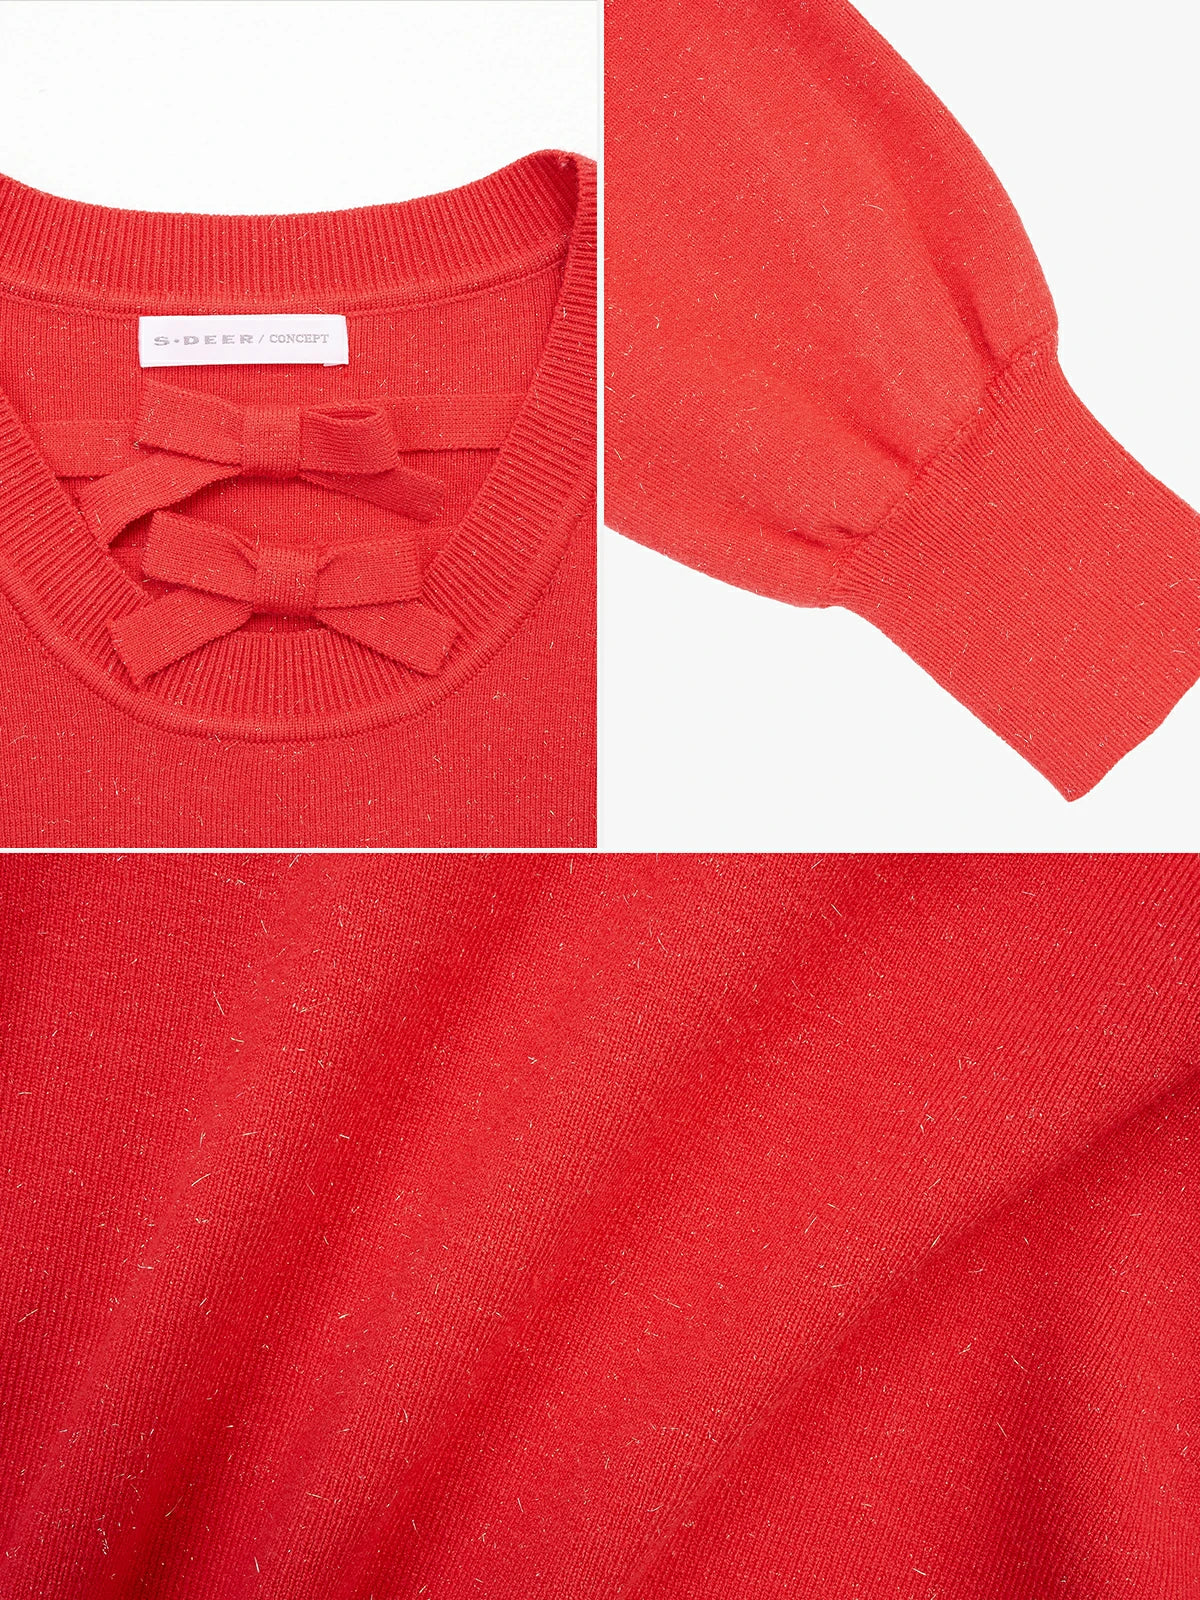 Comfortable fit and stylish details define this red scoop-neck pullover sweater with a lovely bow and threads.&quot;